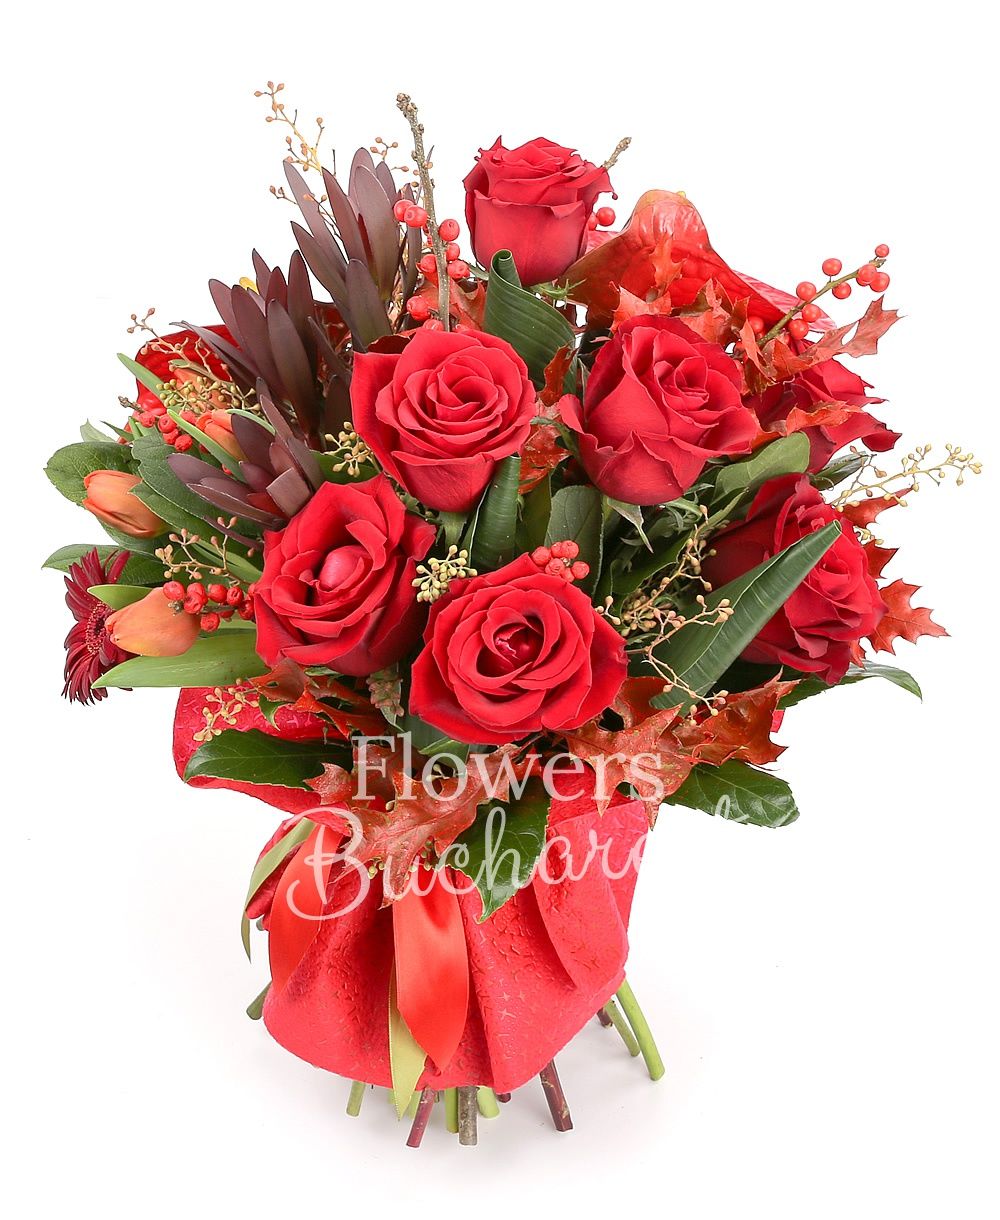 5 red roses, 3 leucadendrons, 5 red gerberas, 5 red tulips, 2 red anthurium, 3 ilex, greenery